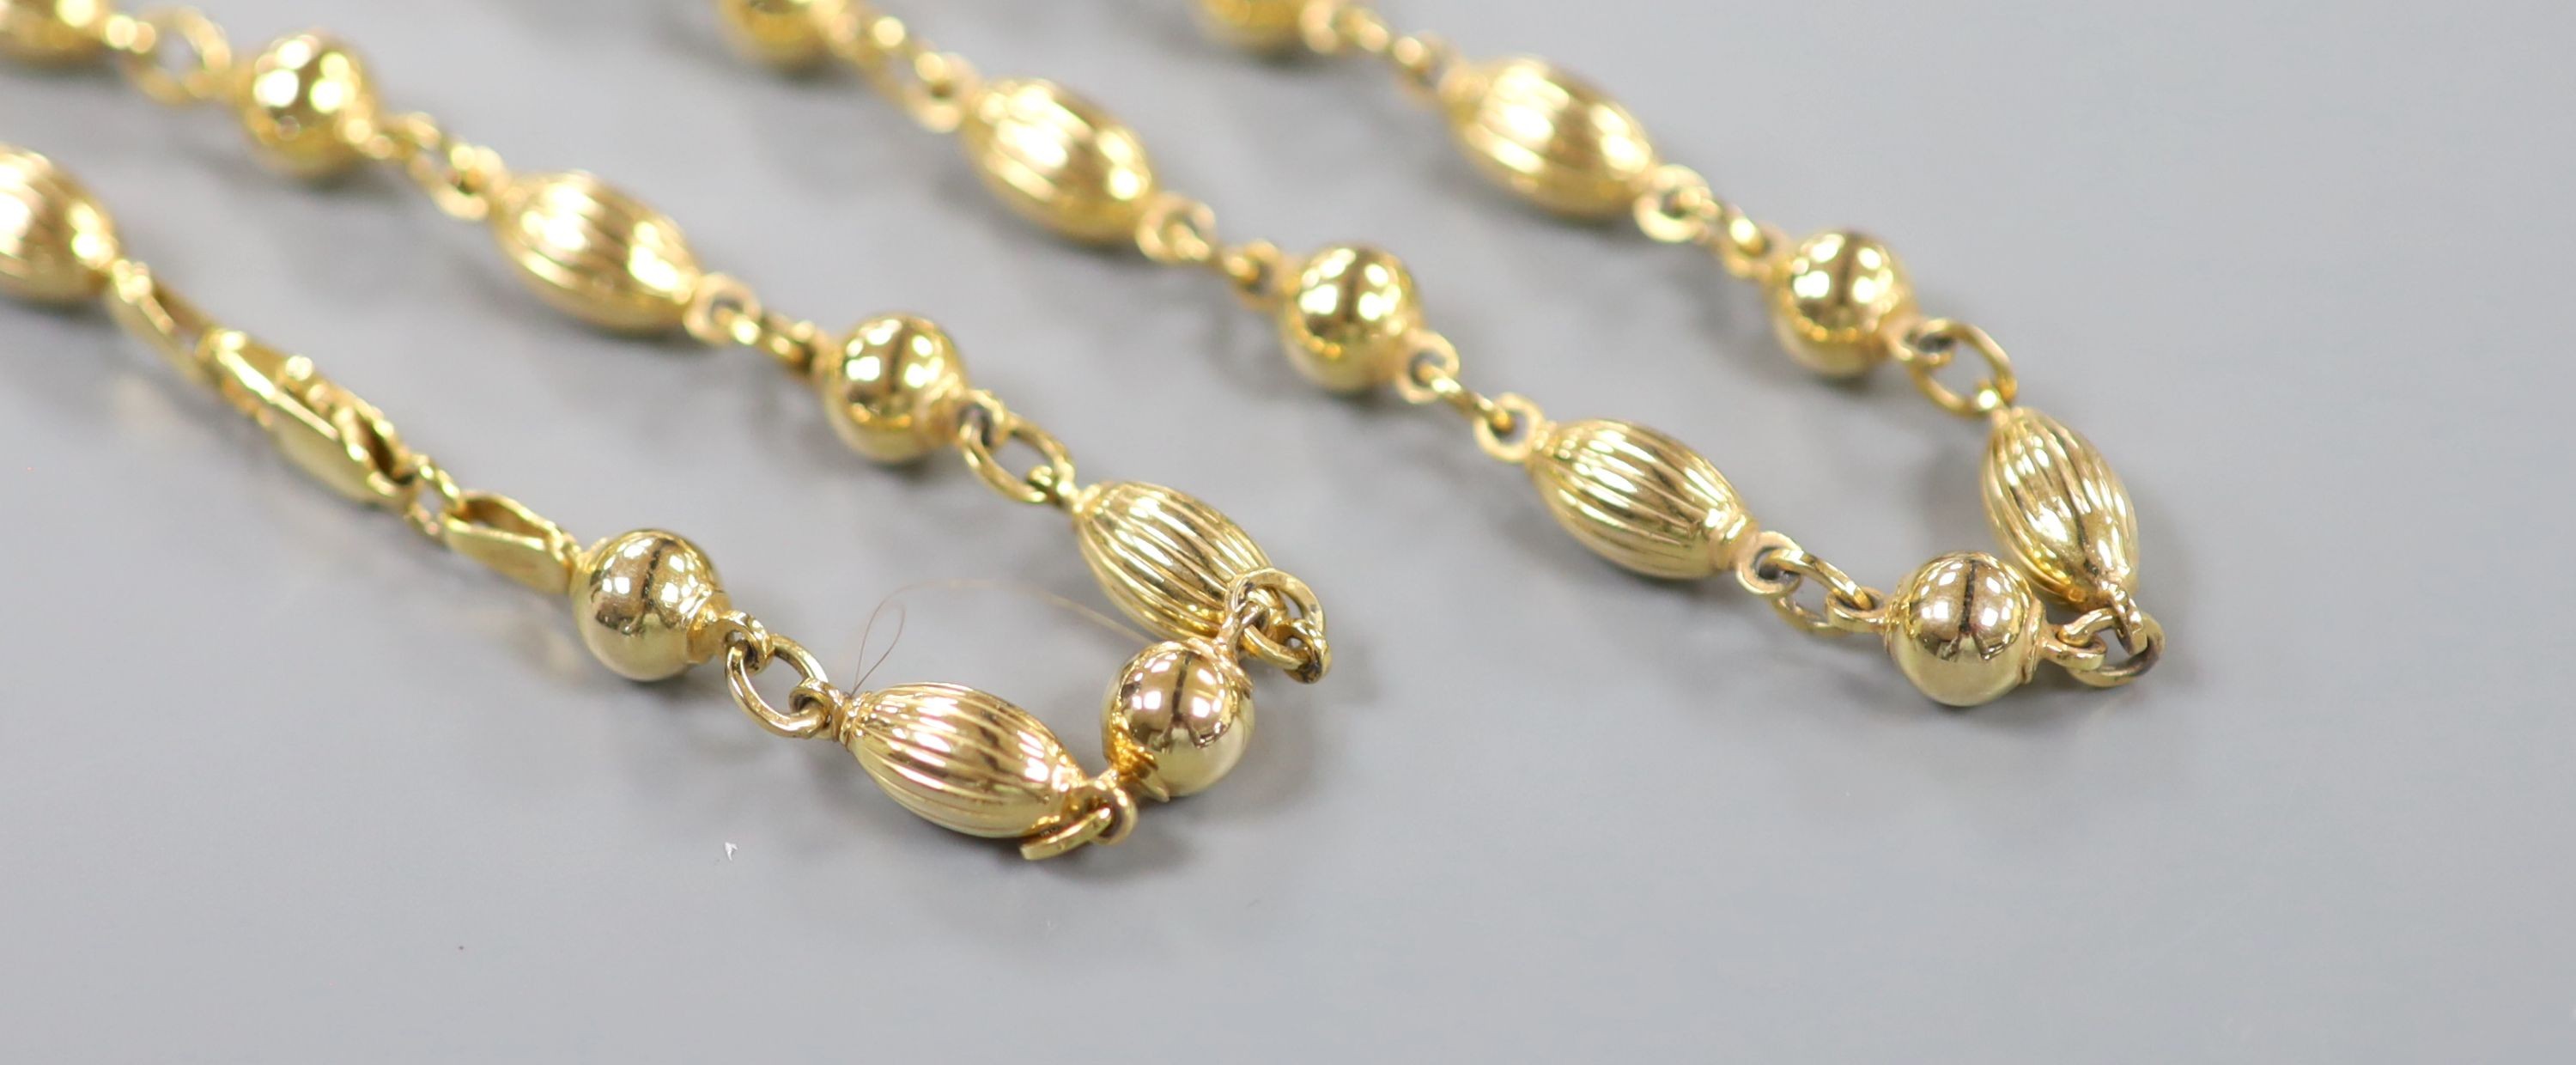 An Italian 375 Uno-A-Erre fluted bead and sphere link chain, 48cm, 16.5 grams.